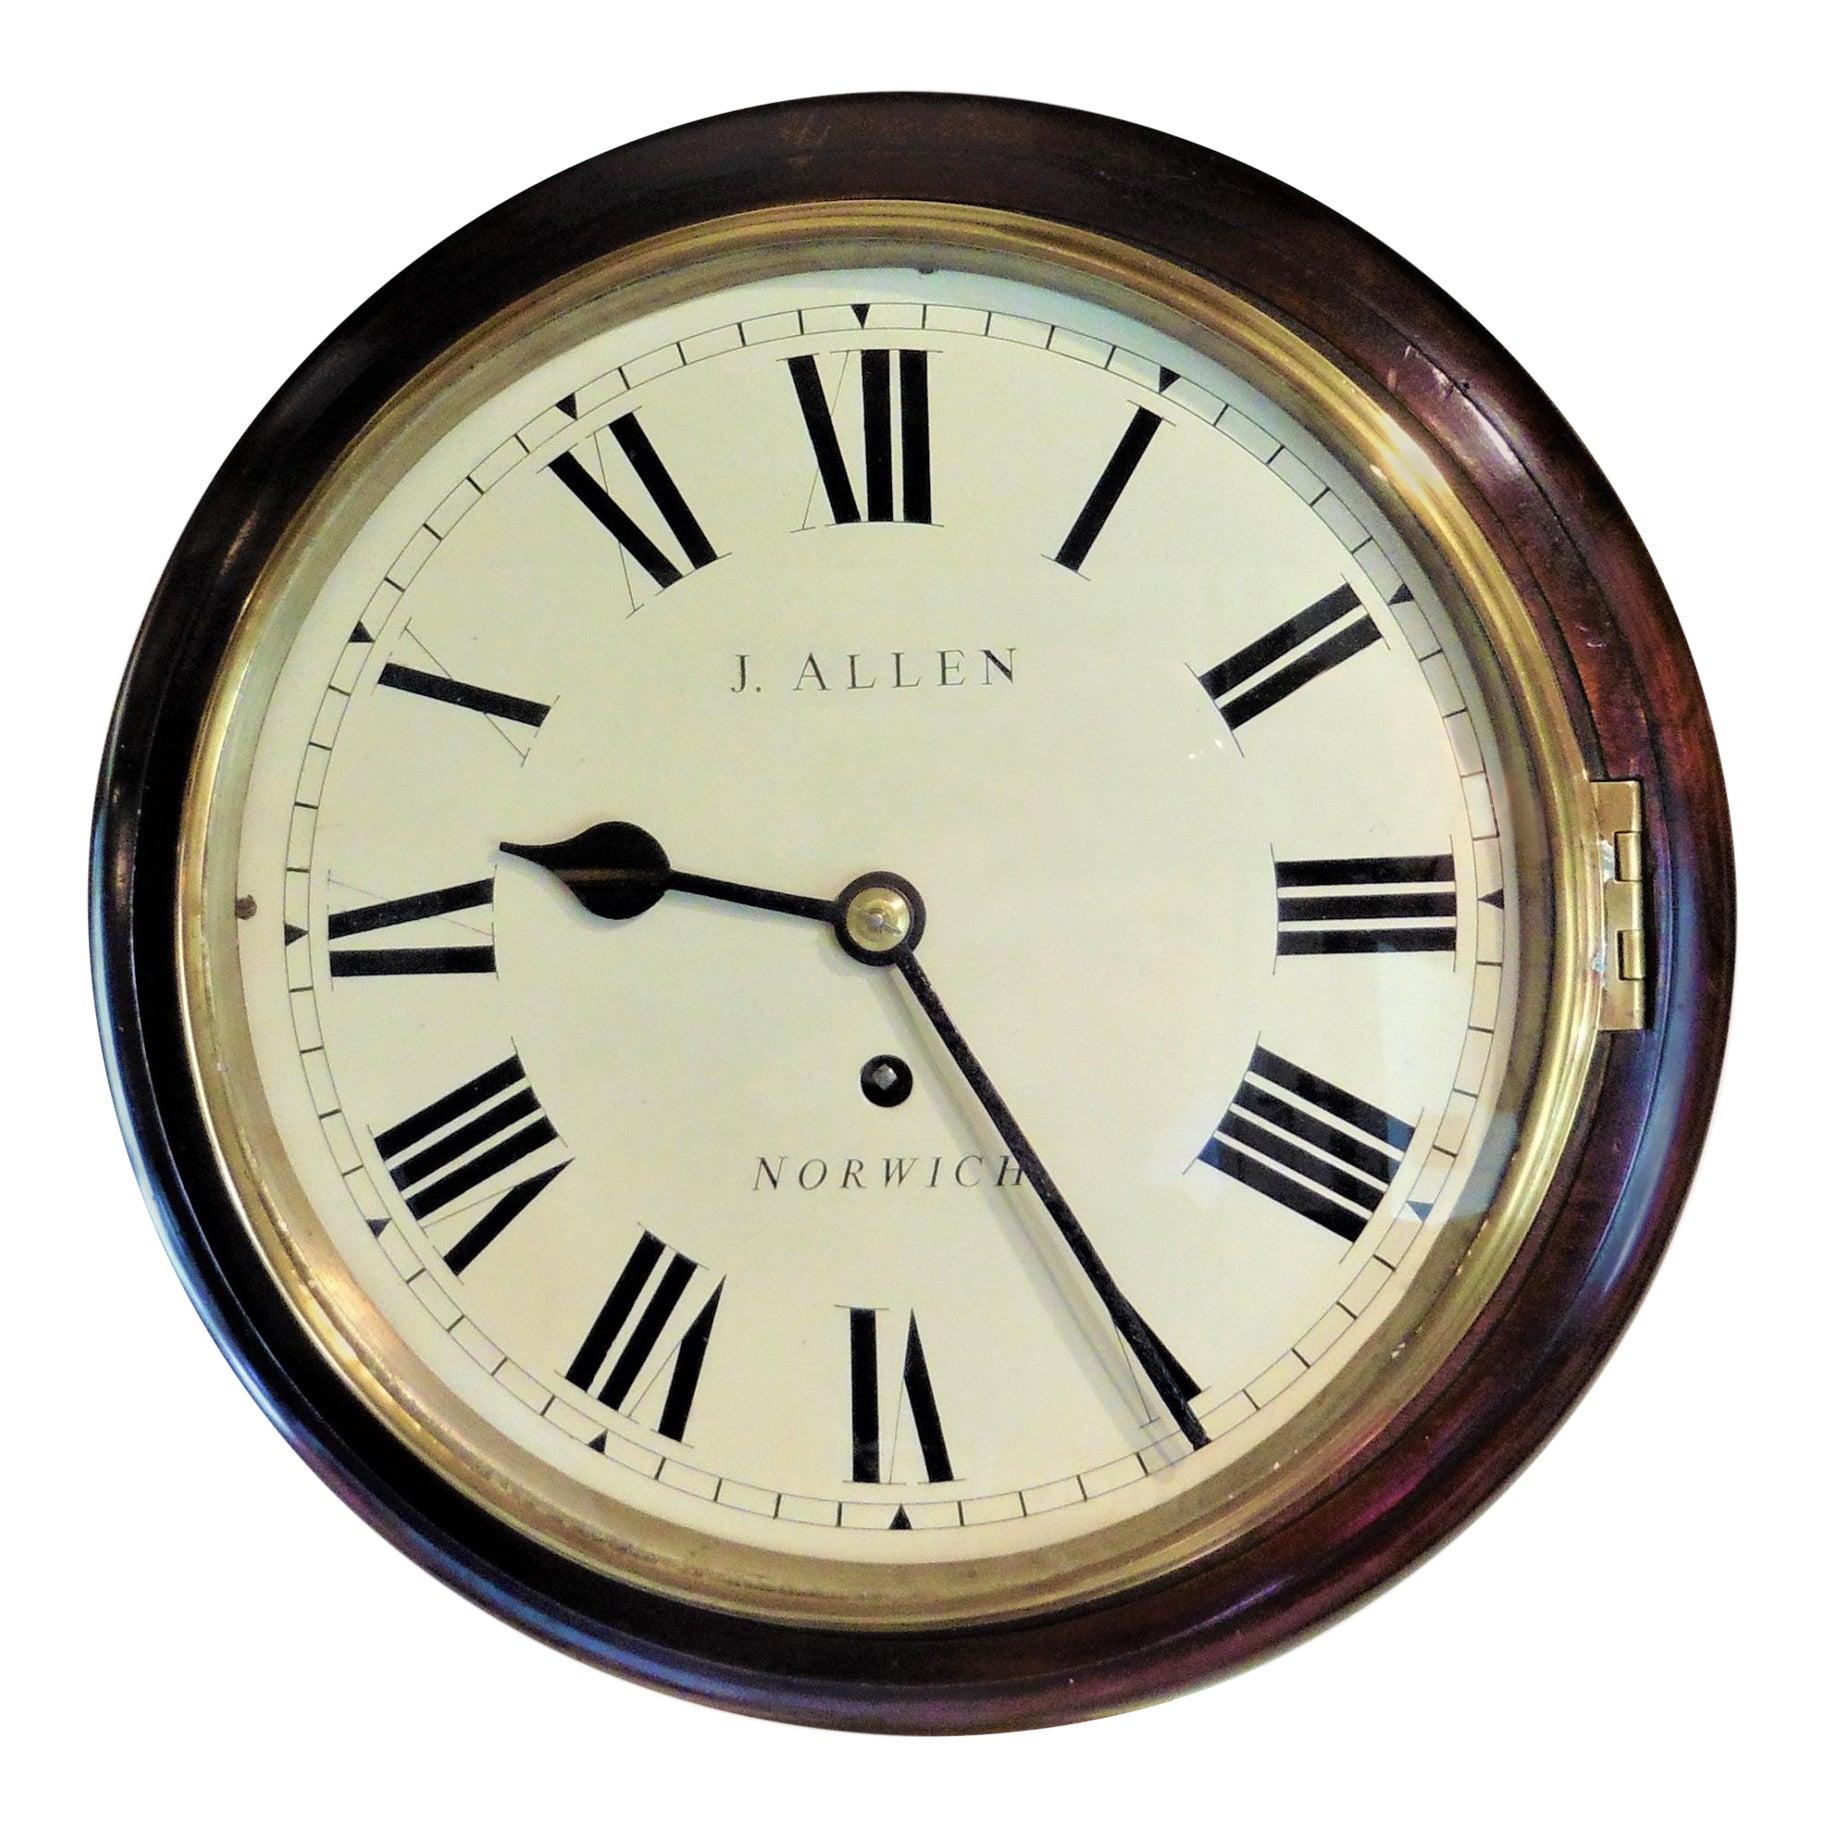 Small Mahogany English Fusee Dial Clock by J.Allen, Norwich